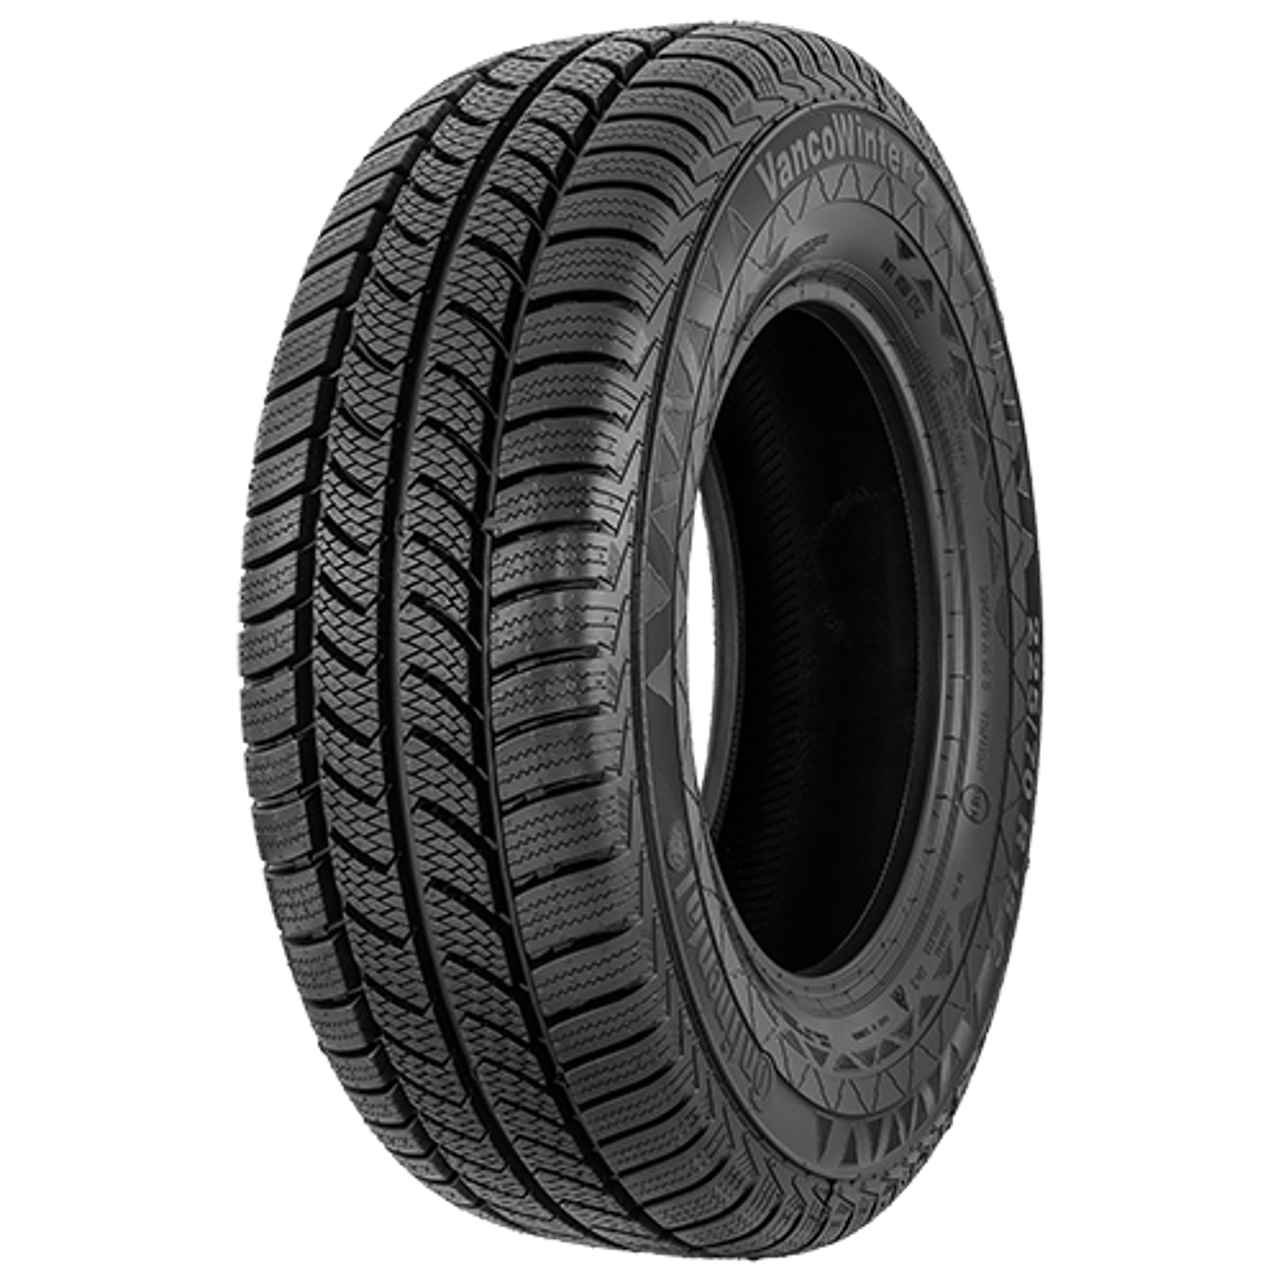 CONTINENTAL VANCOWINTER 2 195/70R15 97T XL